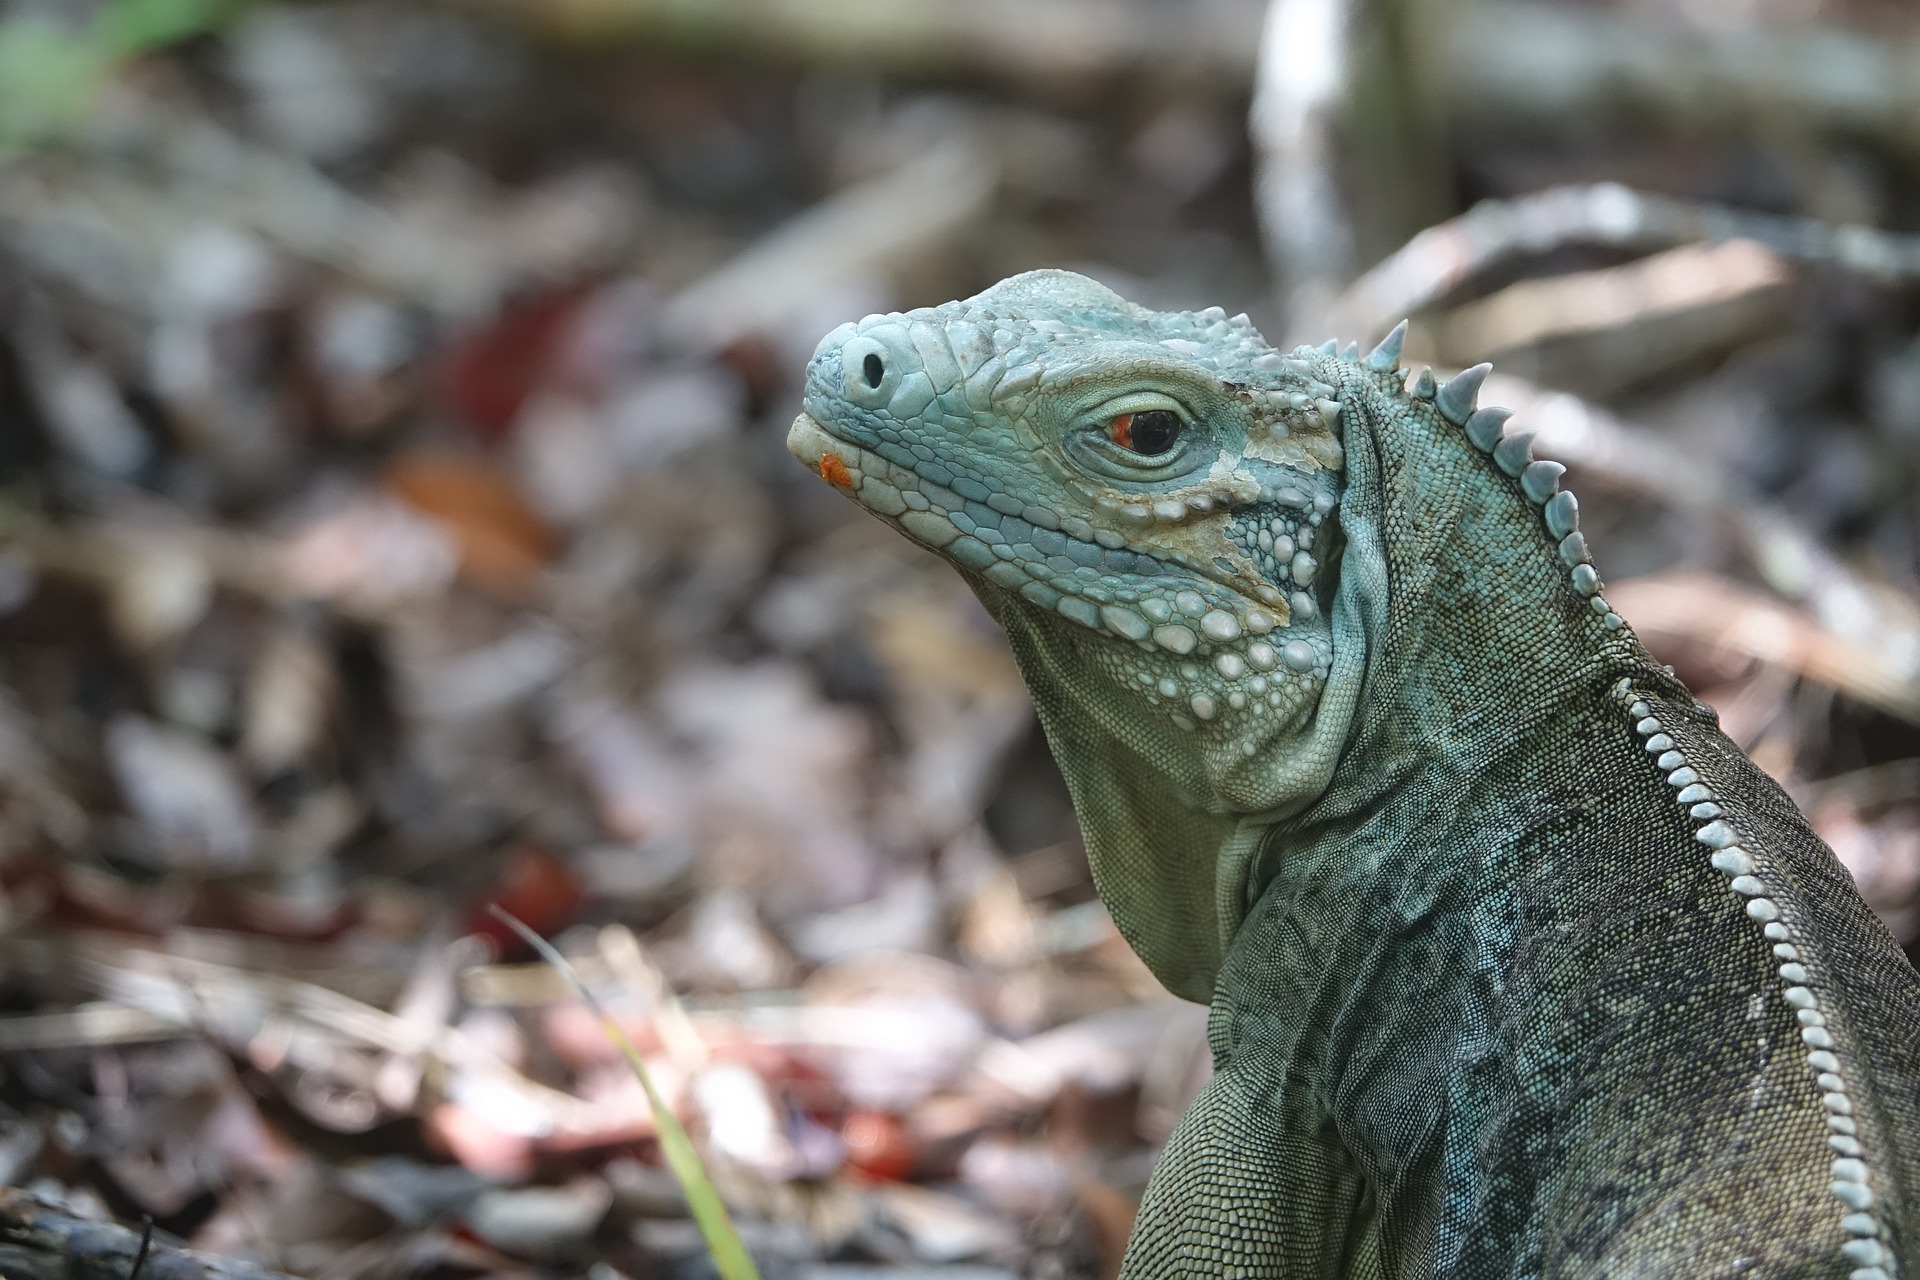 A blue iguana looks over its left shoulder into the camera